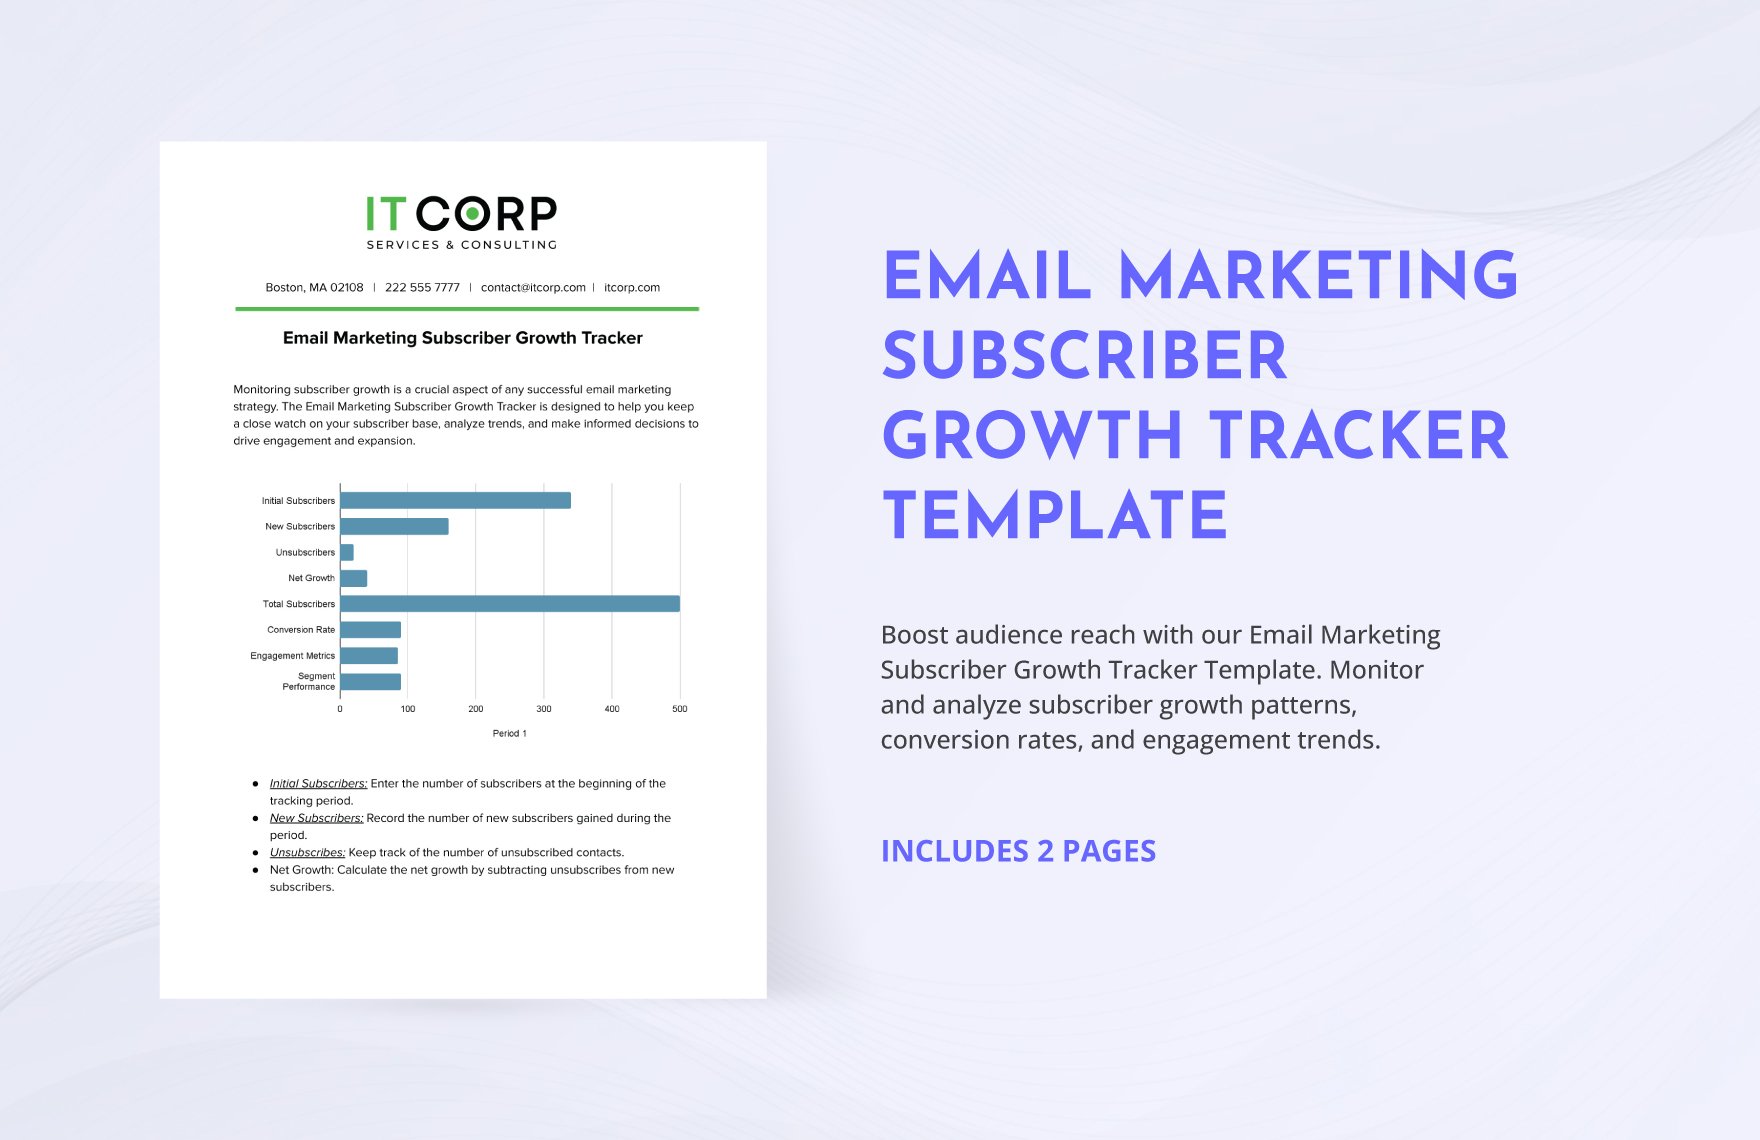 Email Marketing Subscriber Growth Tracker Template in Word, Google Docs, PDF